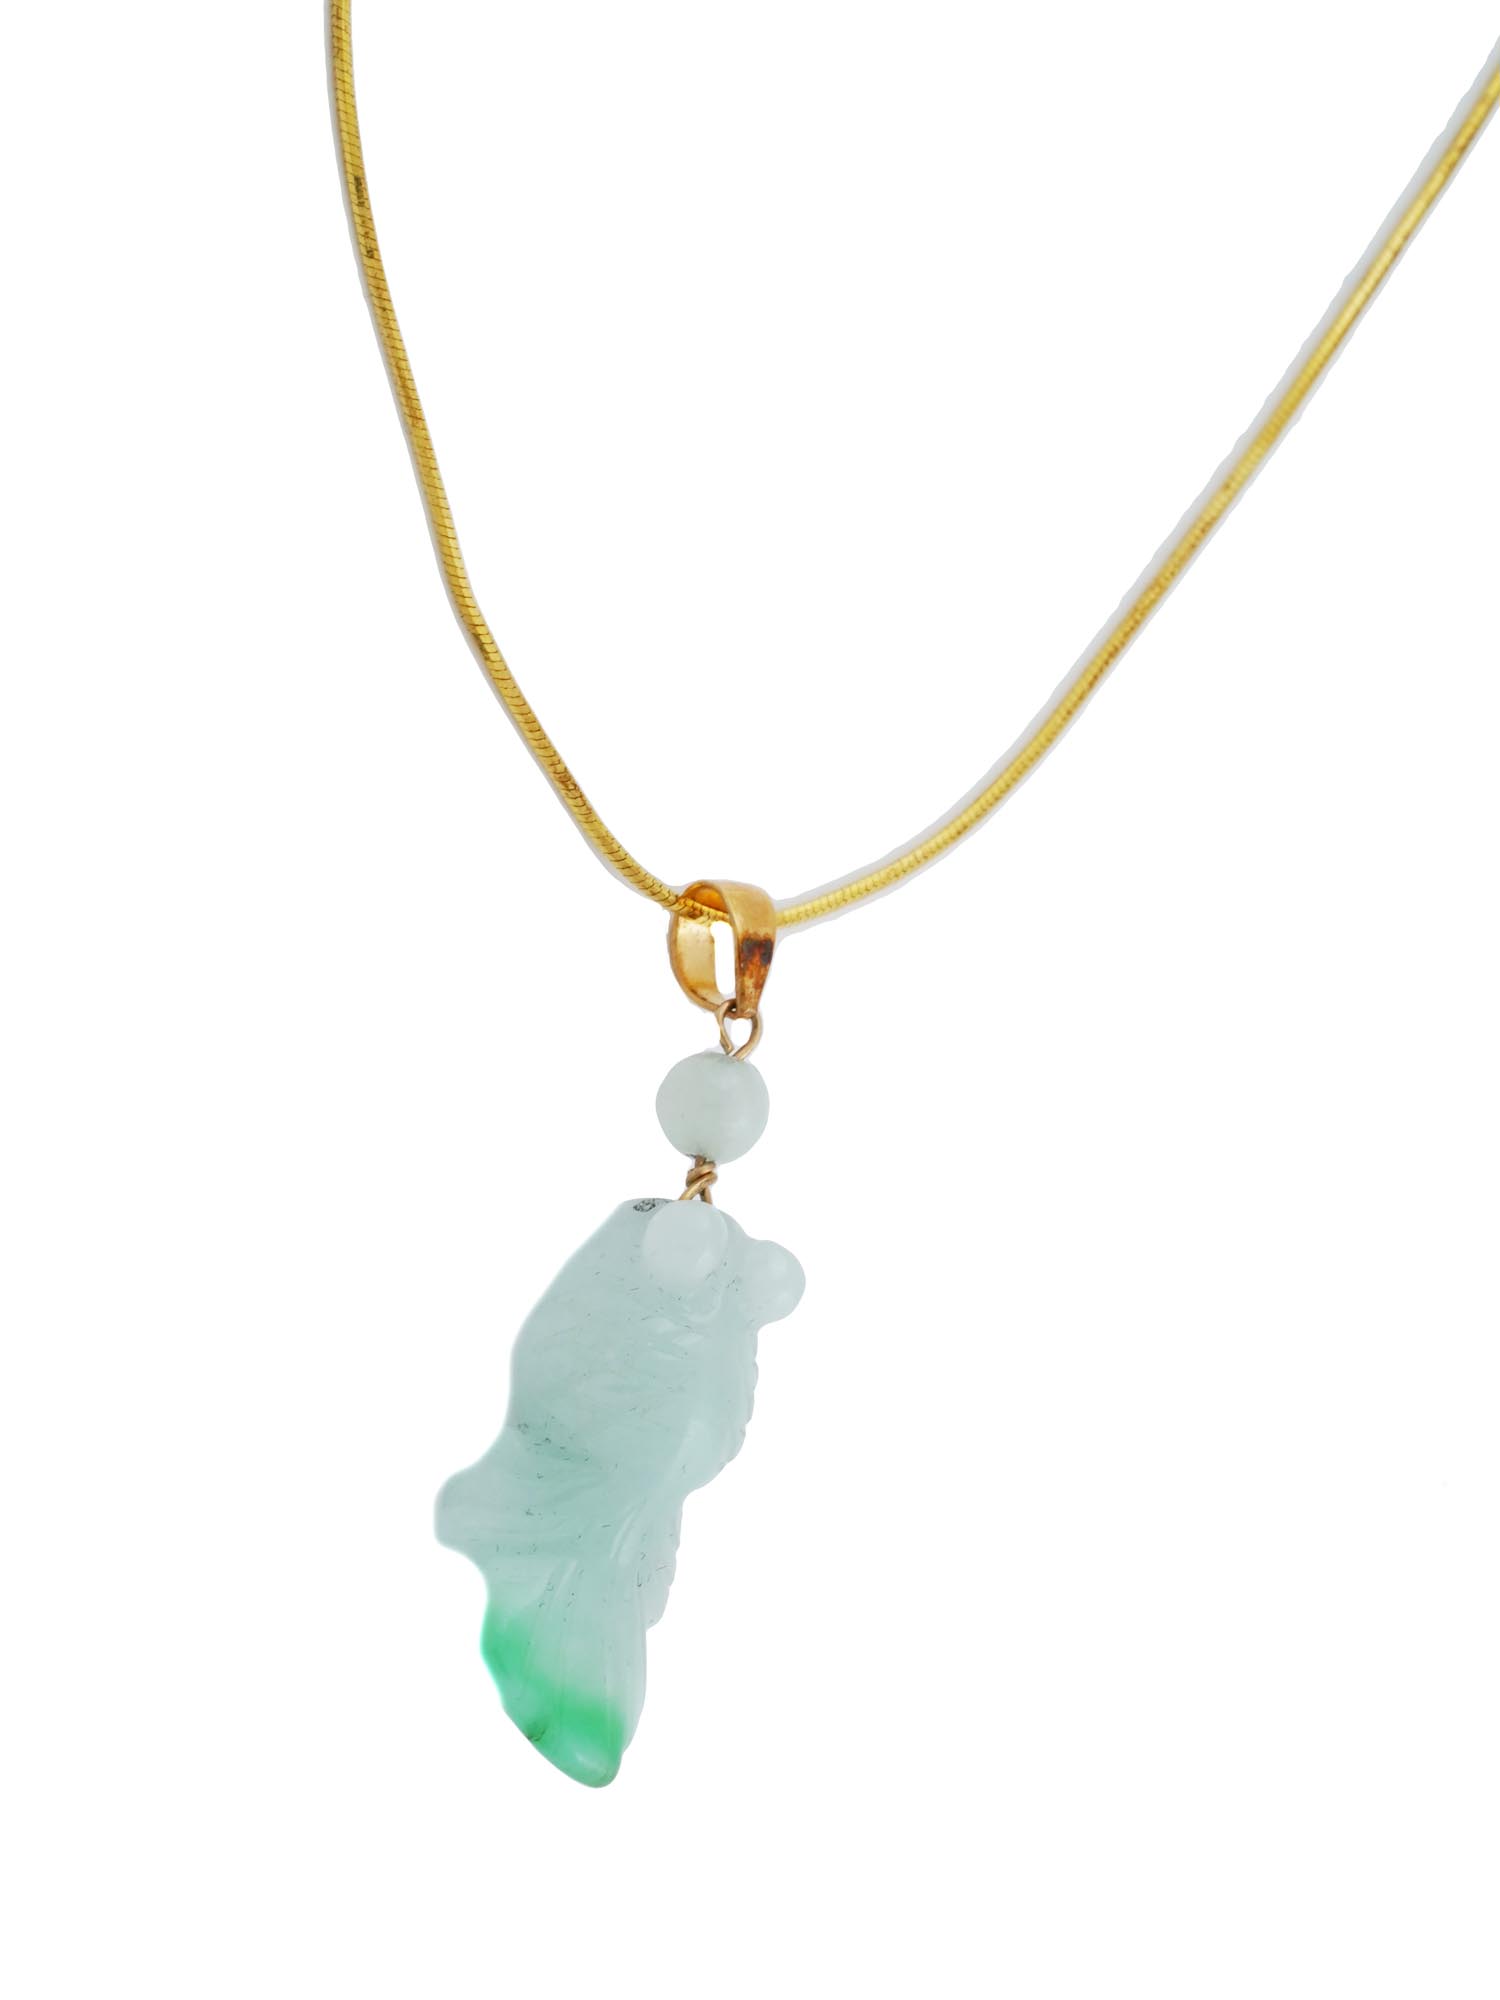 14K JADE PENDANT W GOLD PLATED SILVER NECKLACE PIC-2